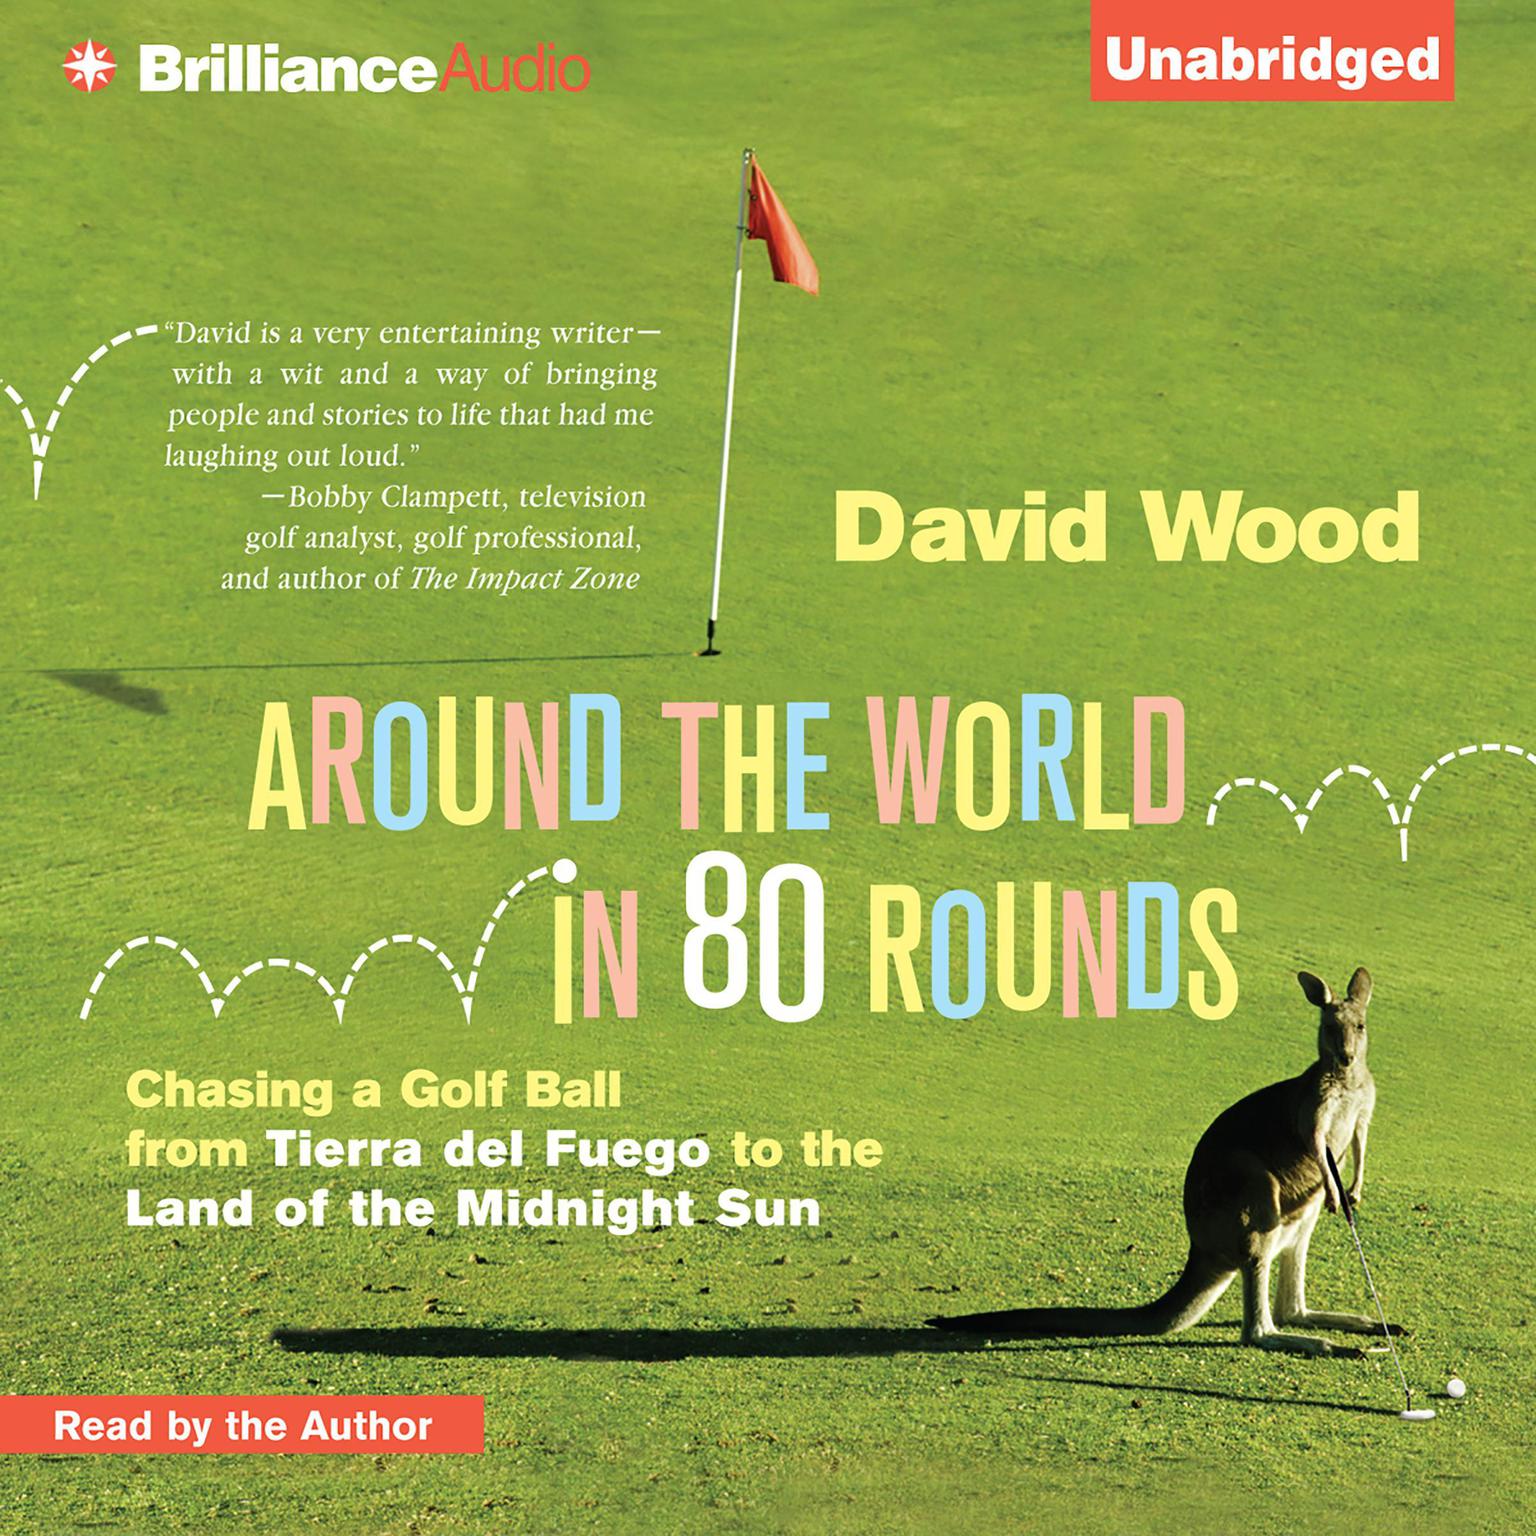 Around the World in 80 Rounds: Chasing a Golf Ball from Tierra del Fuego to the Land of the Midnight Sun Audiobook, by David Wood